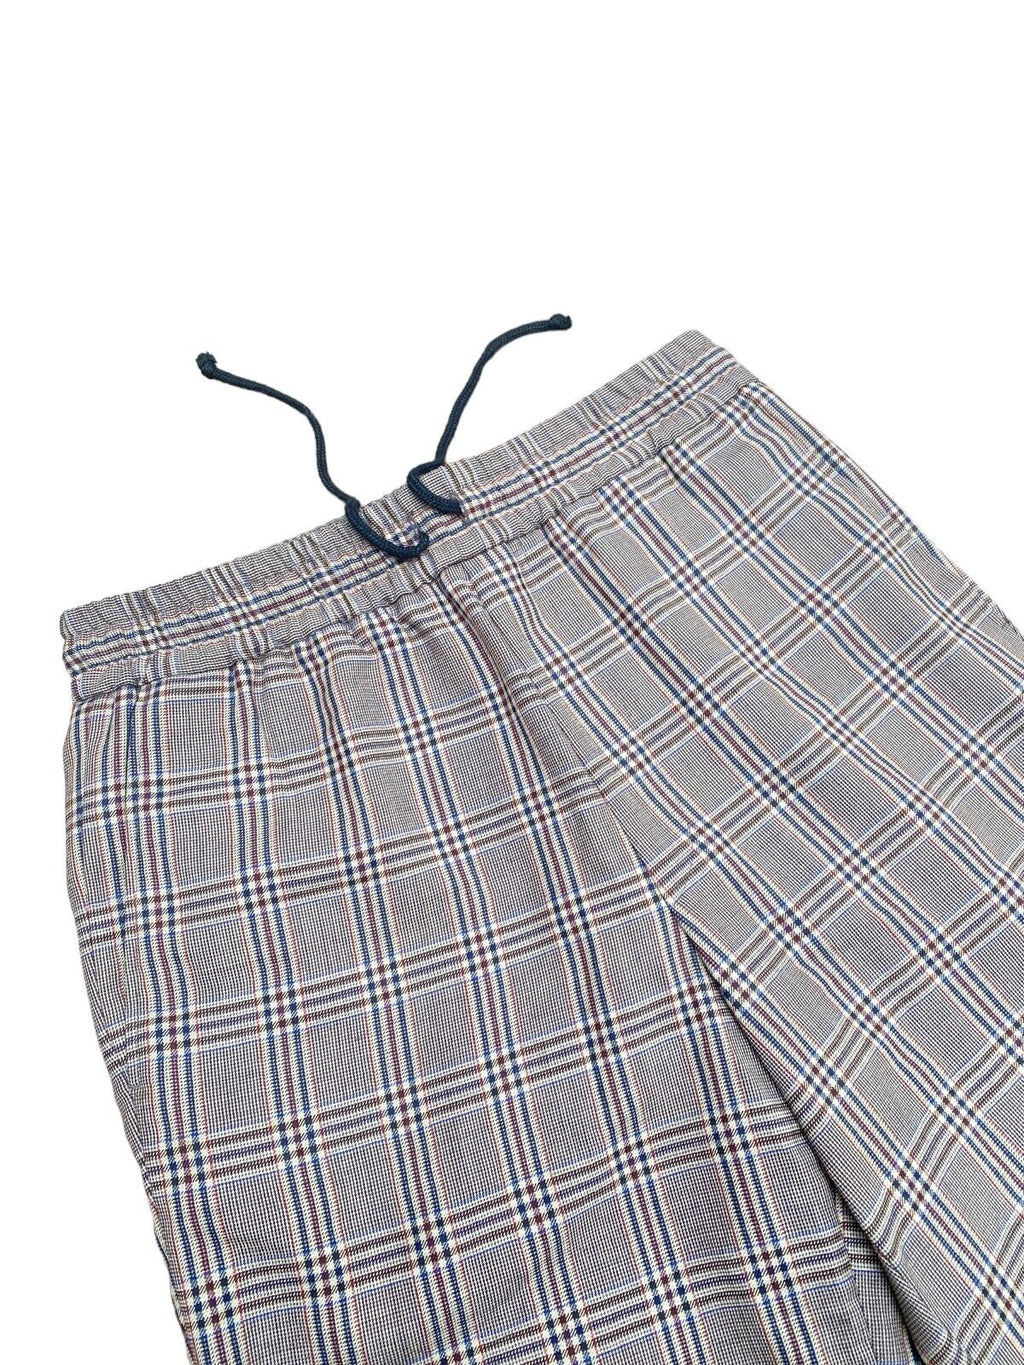 SS 2018 Checkered Wool Shorts Size M  fits US 29 to 33